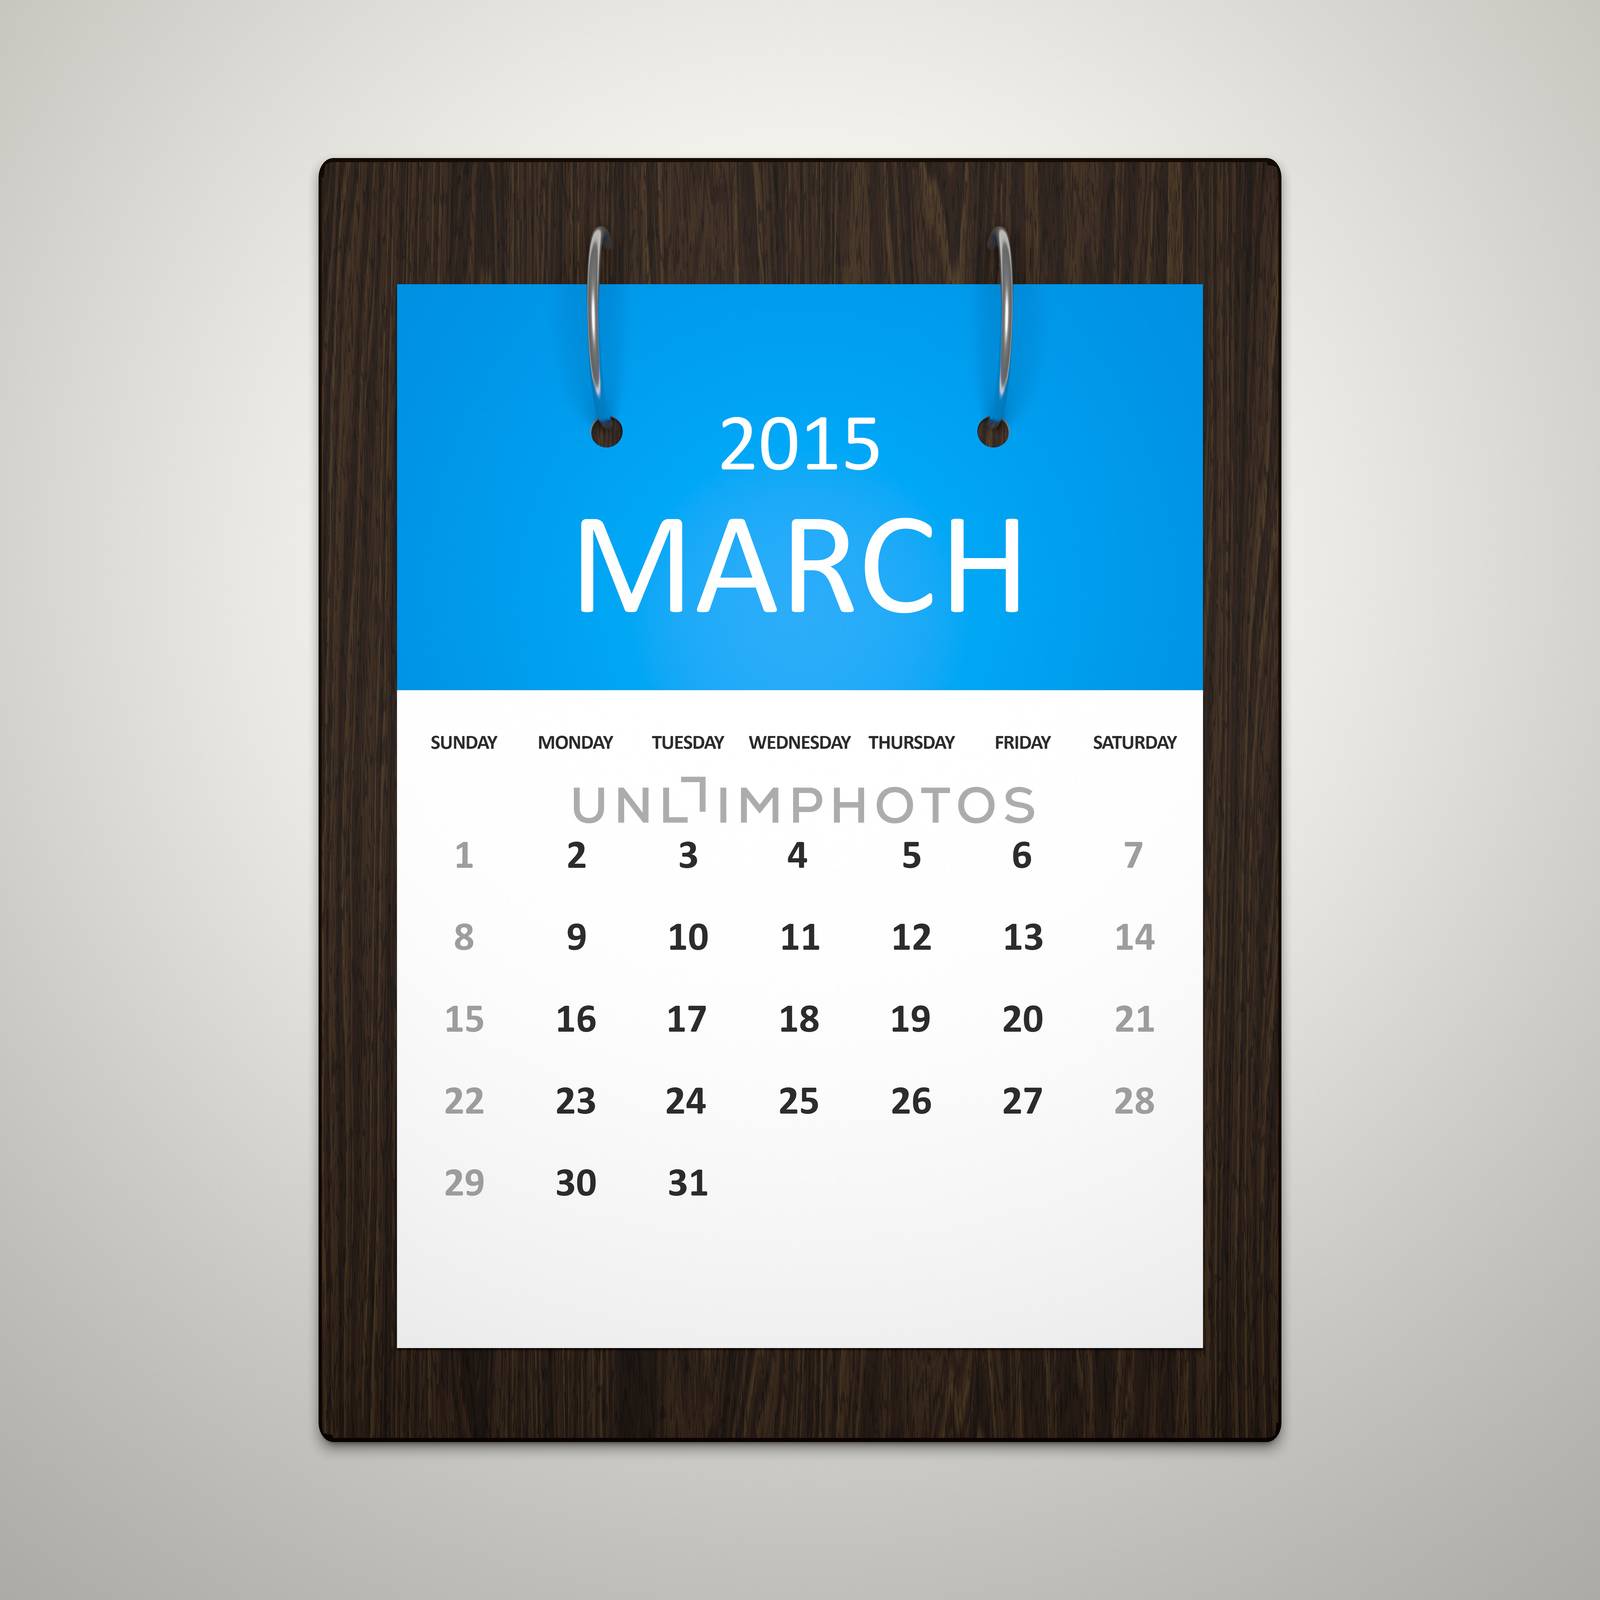 An image of a stylish calendar for event planning March 2015